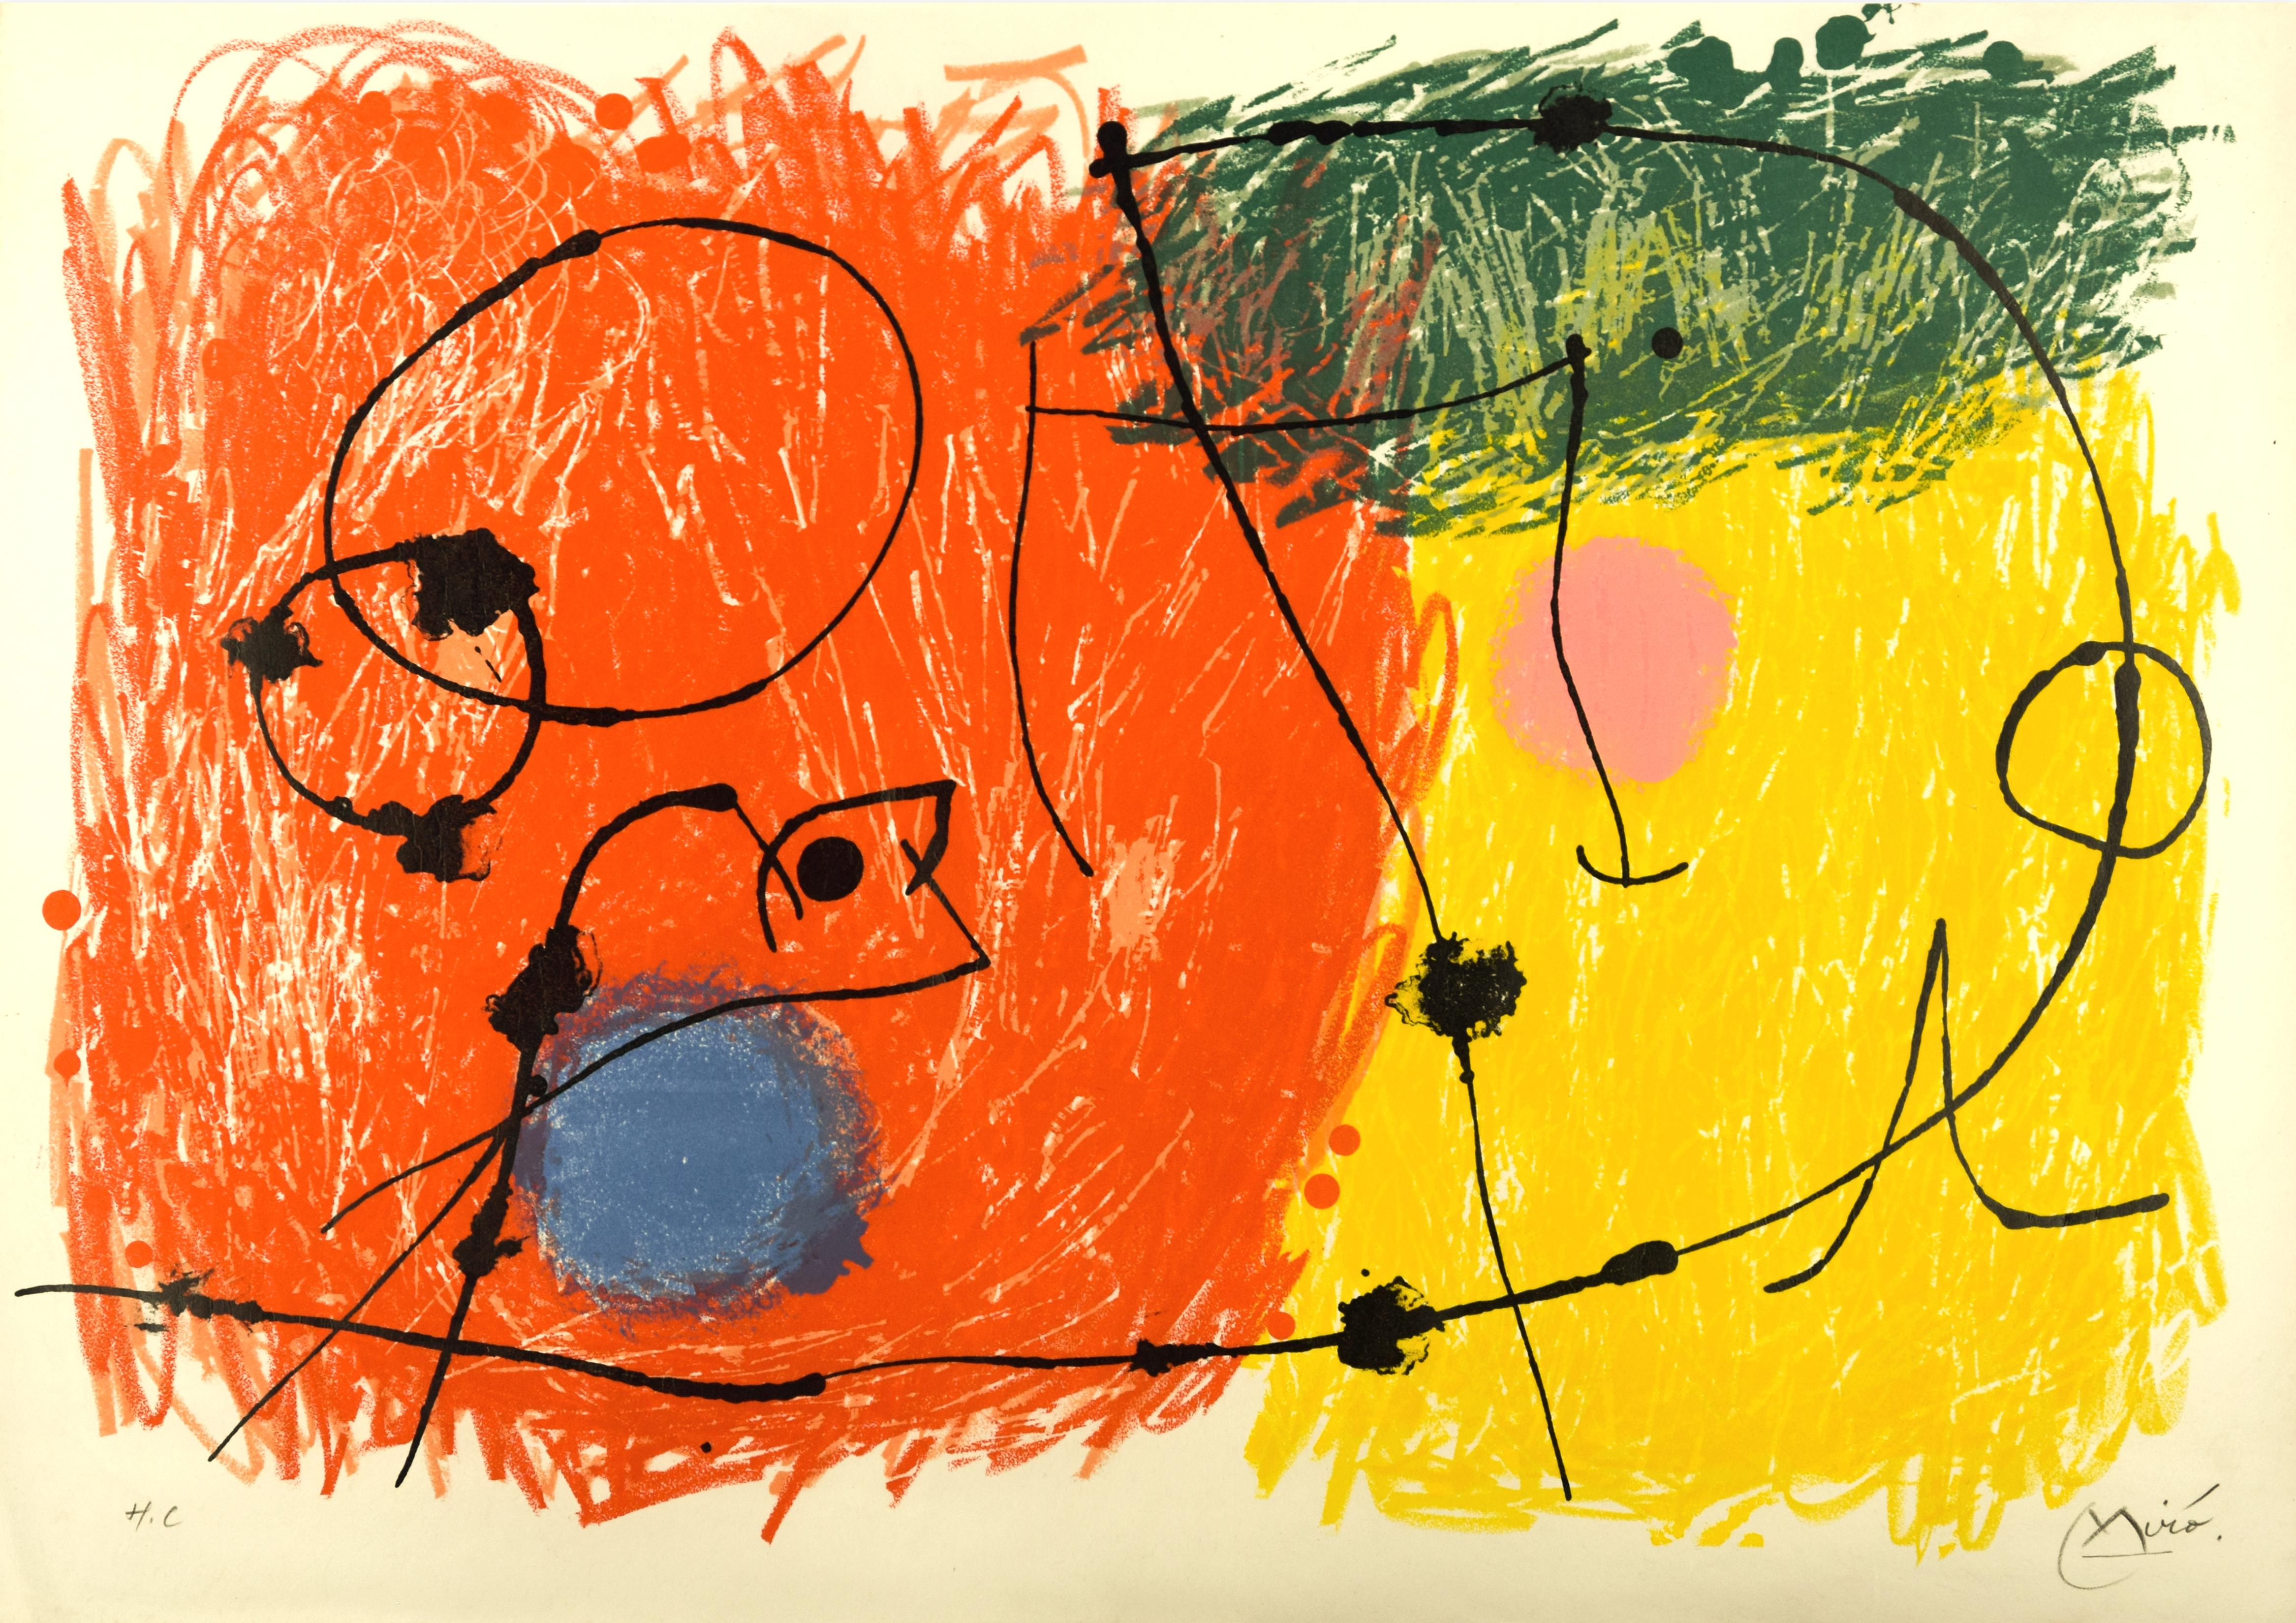 "Le Lézard aux Plumes d'Or"  is an original lithograph realized by Joan Miró in 1971, and part of the famous homonym series.
Hand signed and numbered, it is an H.C. (out of commerce) specimen on parchment. outside the edition of 80 (30 on parchment